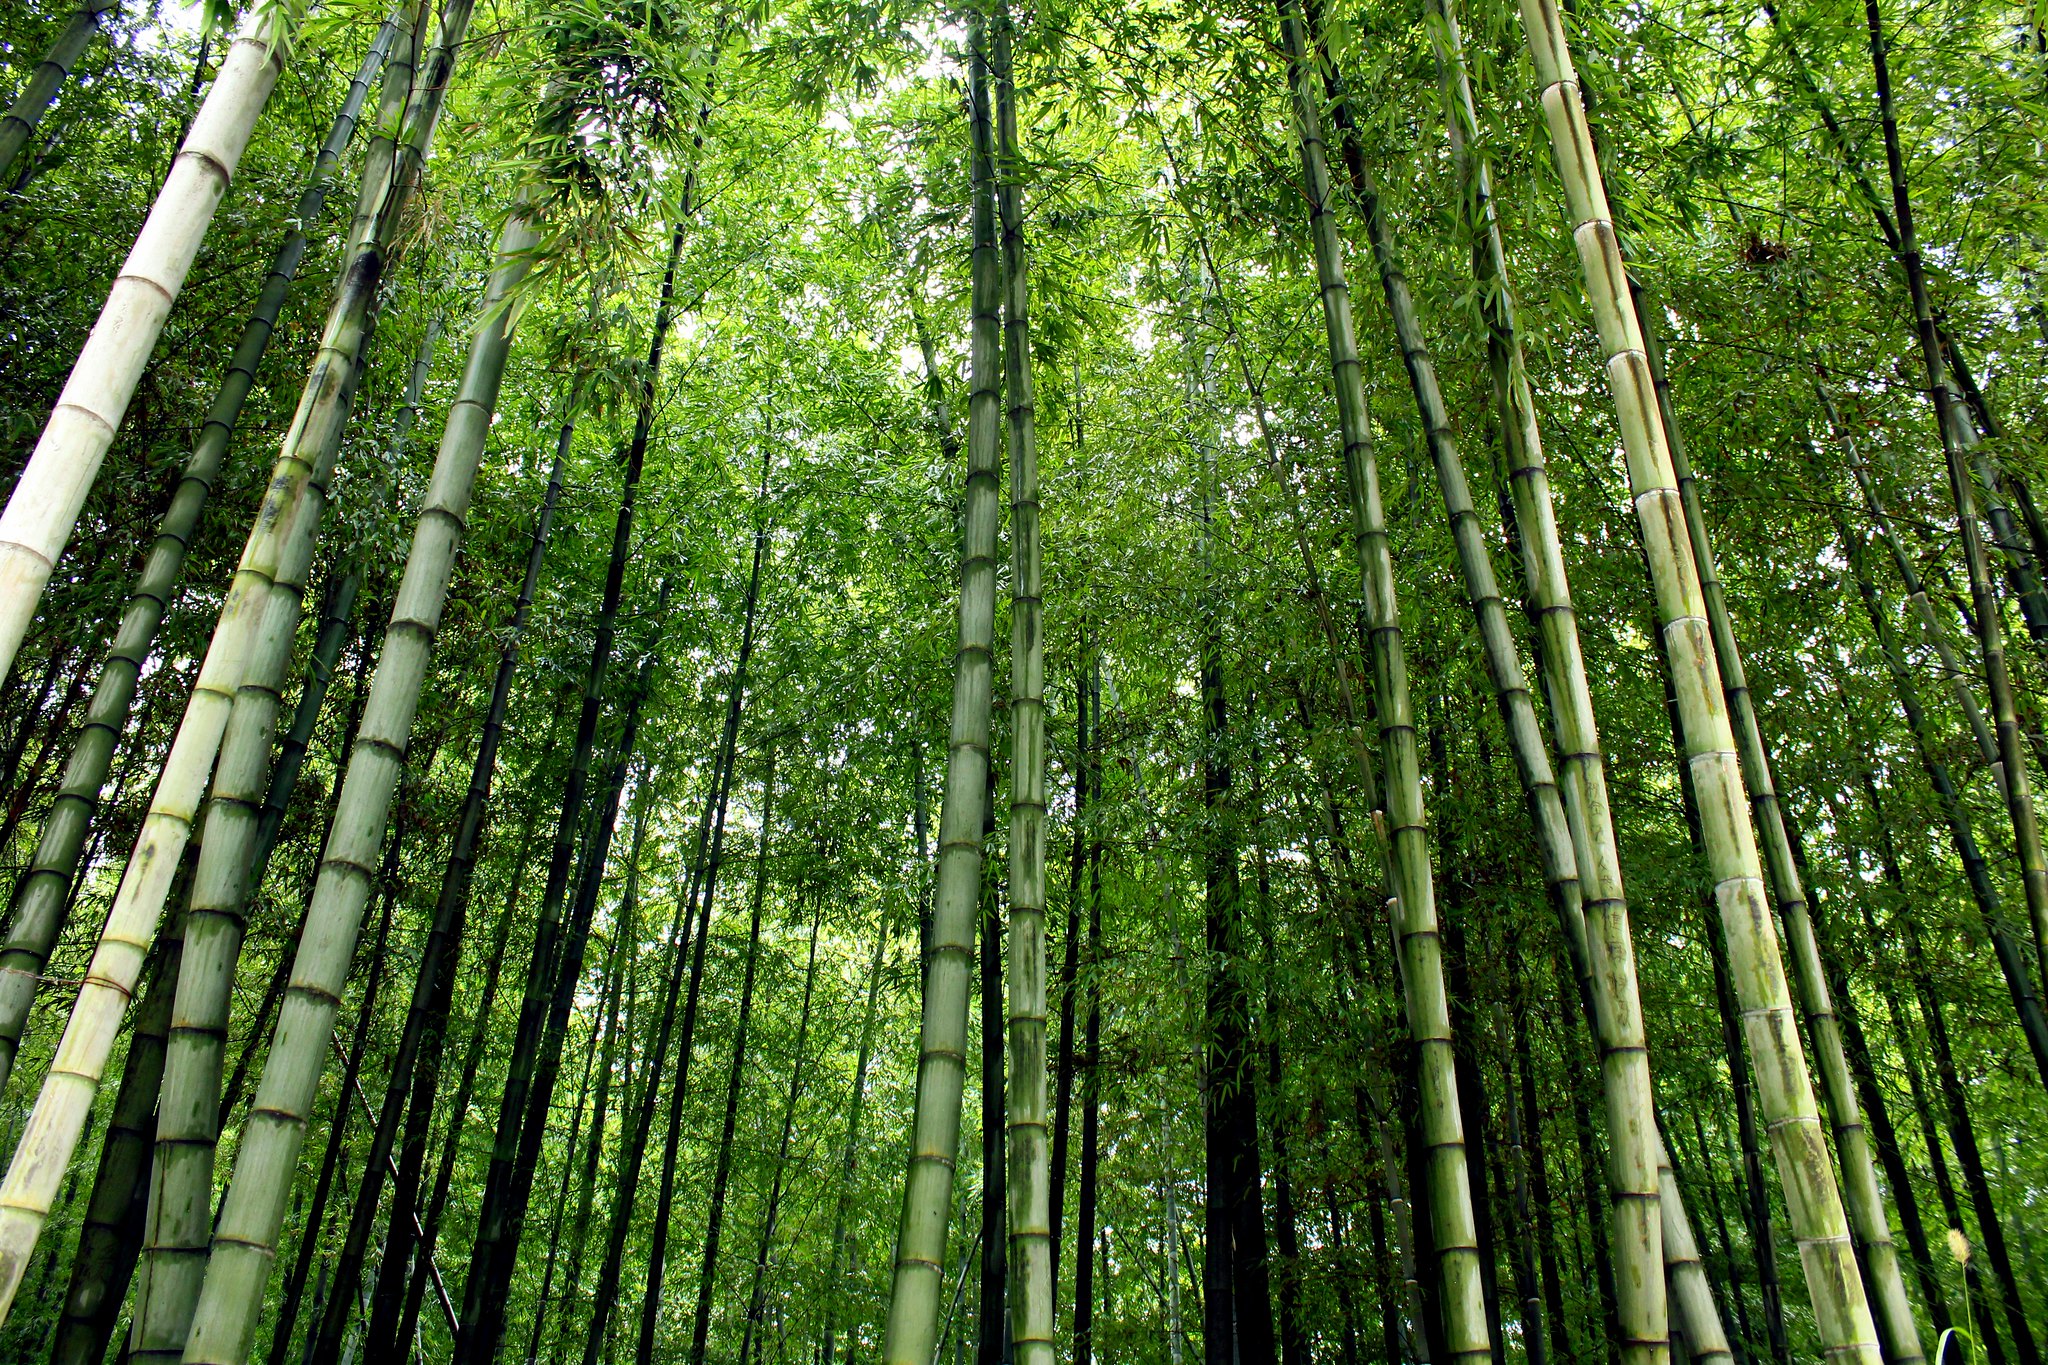 China has been implementing some version of nature-based solutions for decades, if not centuries. : JFXie ‘Simplicity and bamboo forests’ via Flickr https://flic.kr/p/daVPZc CC-BY-2.0